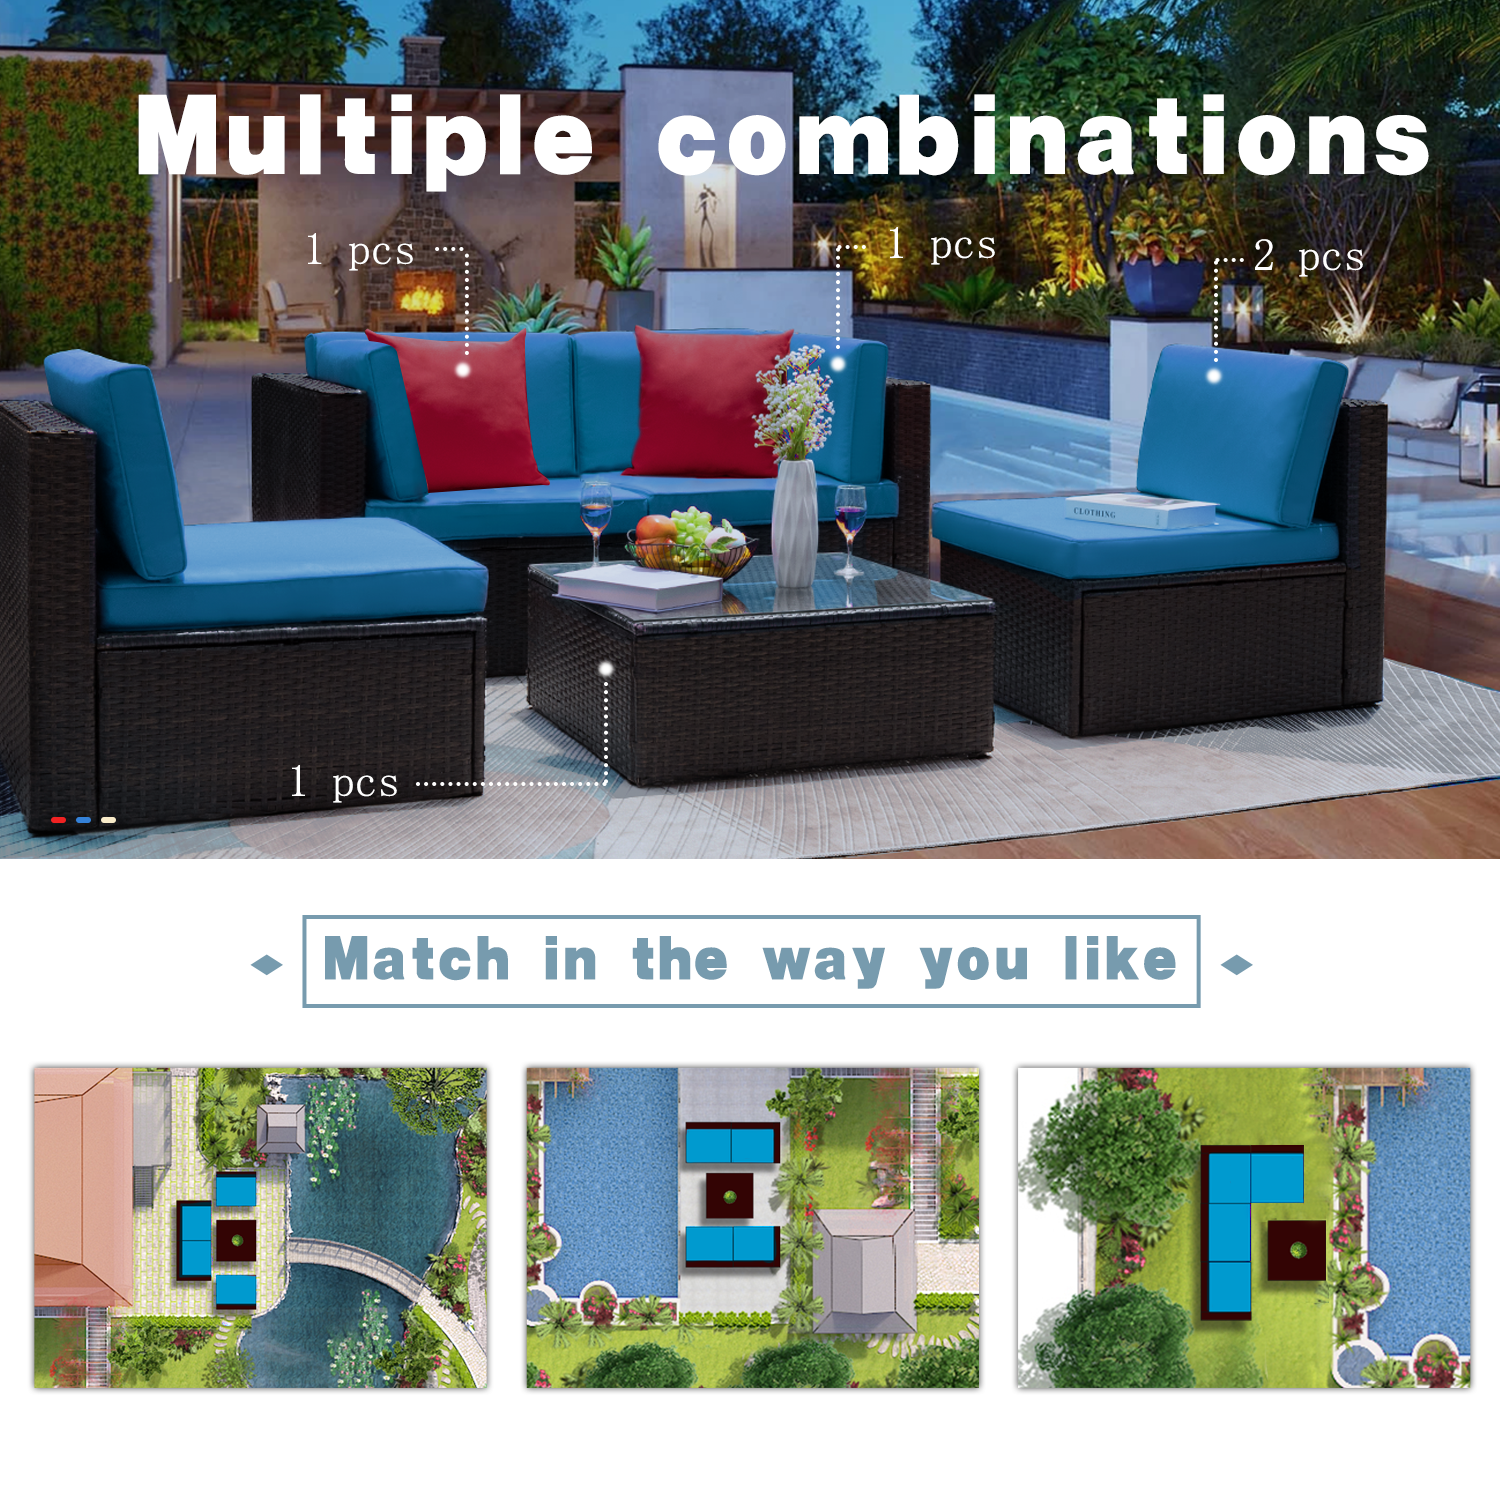 Lacoo 5 Pieces Patio Sectional Sofa Set All-Weather Wicker Rattan Conversation Sets with Glass Table, Blue - image 5 of 7